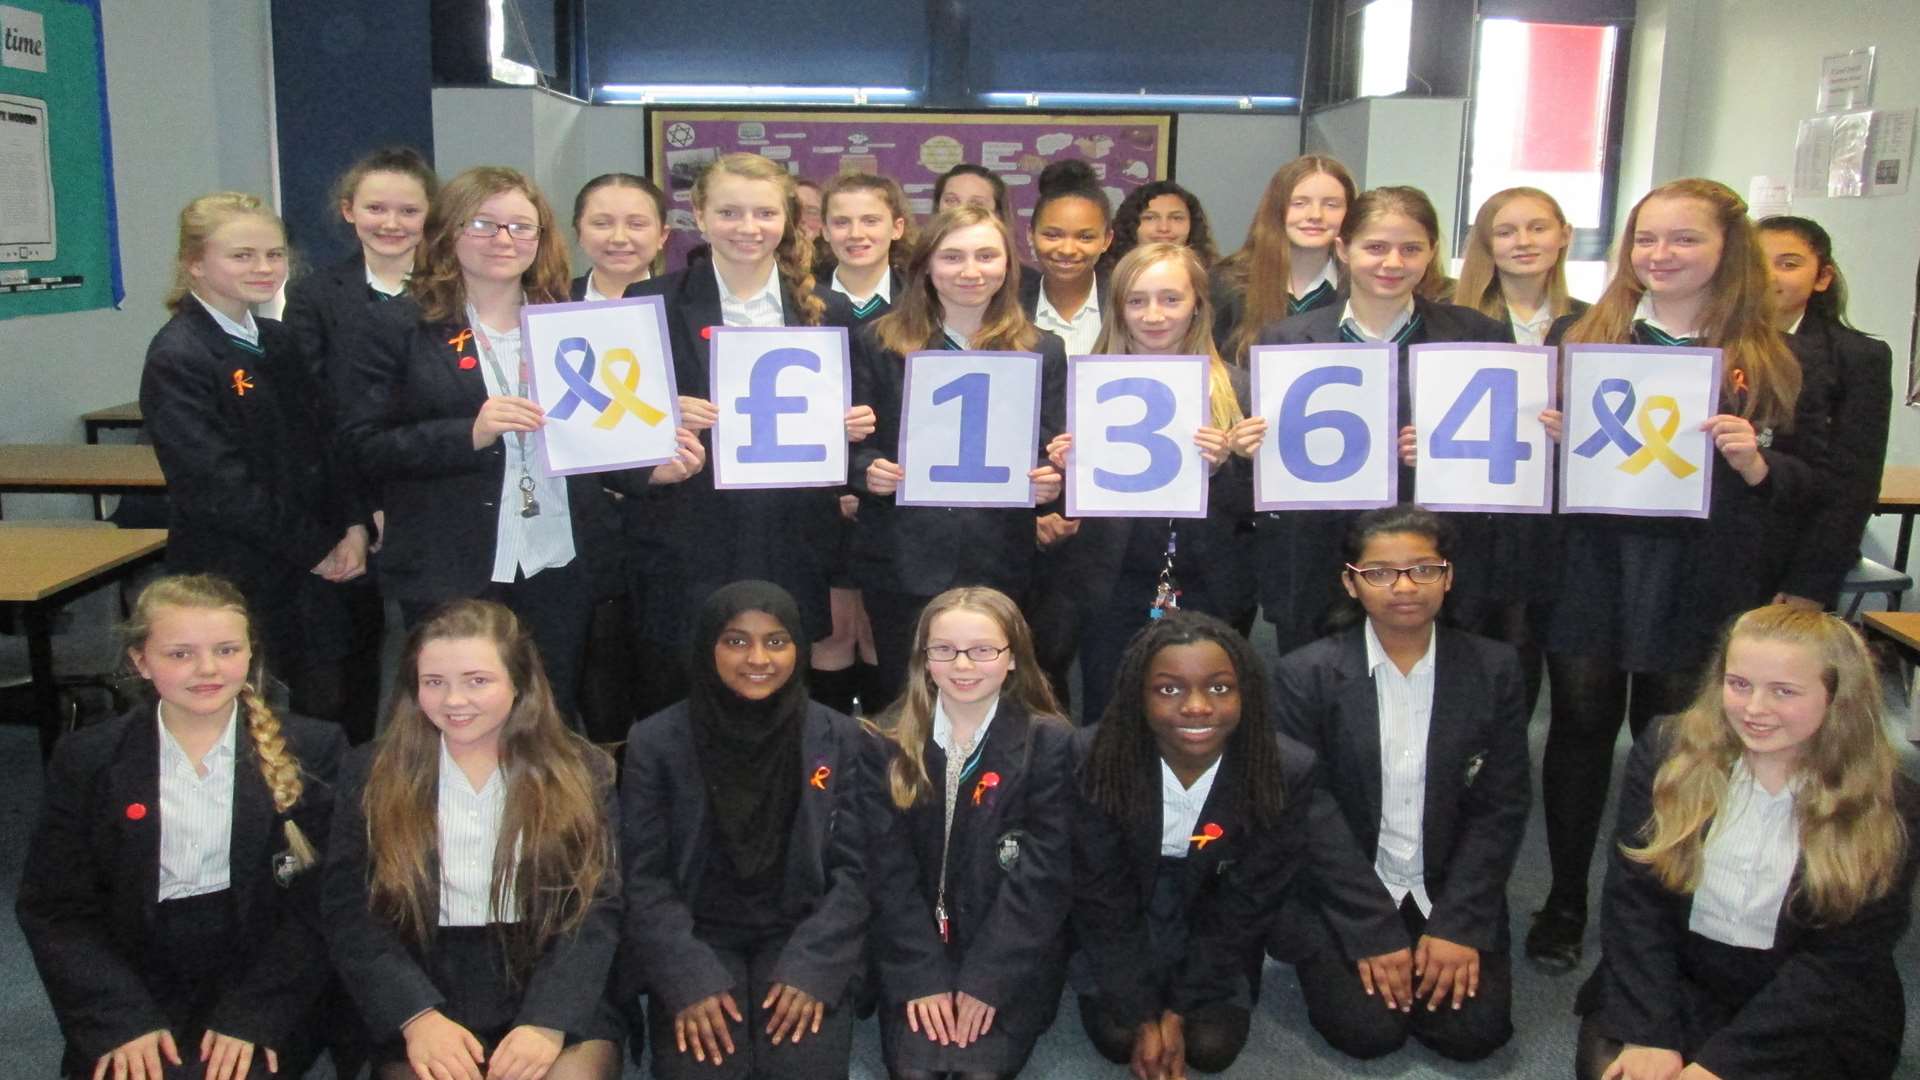 Lucie's form group with the total amount raised